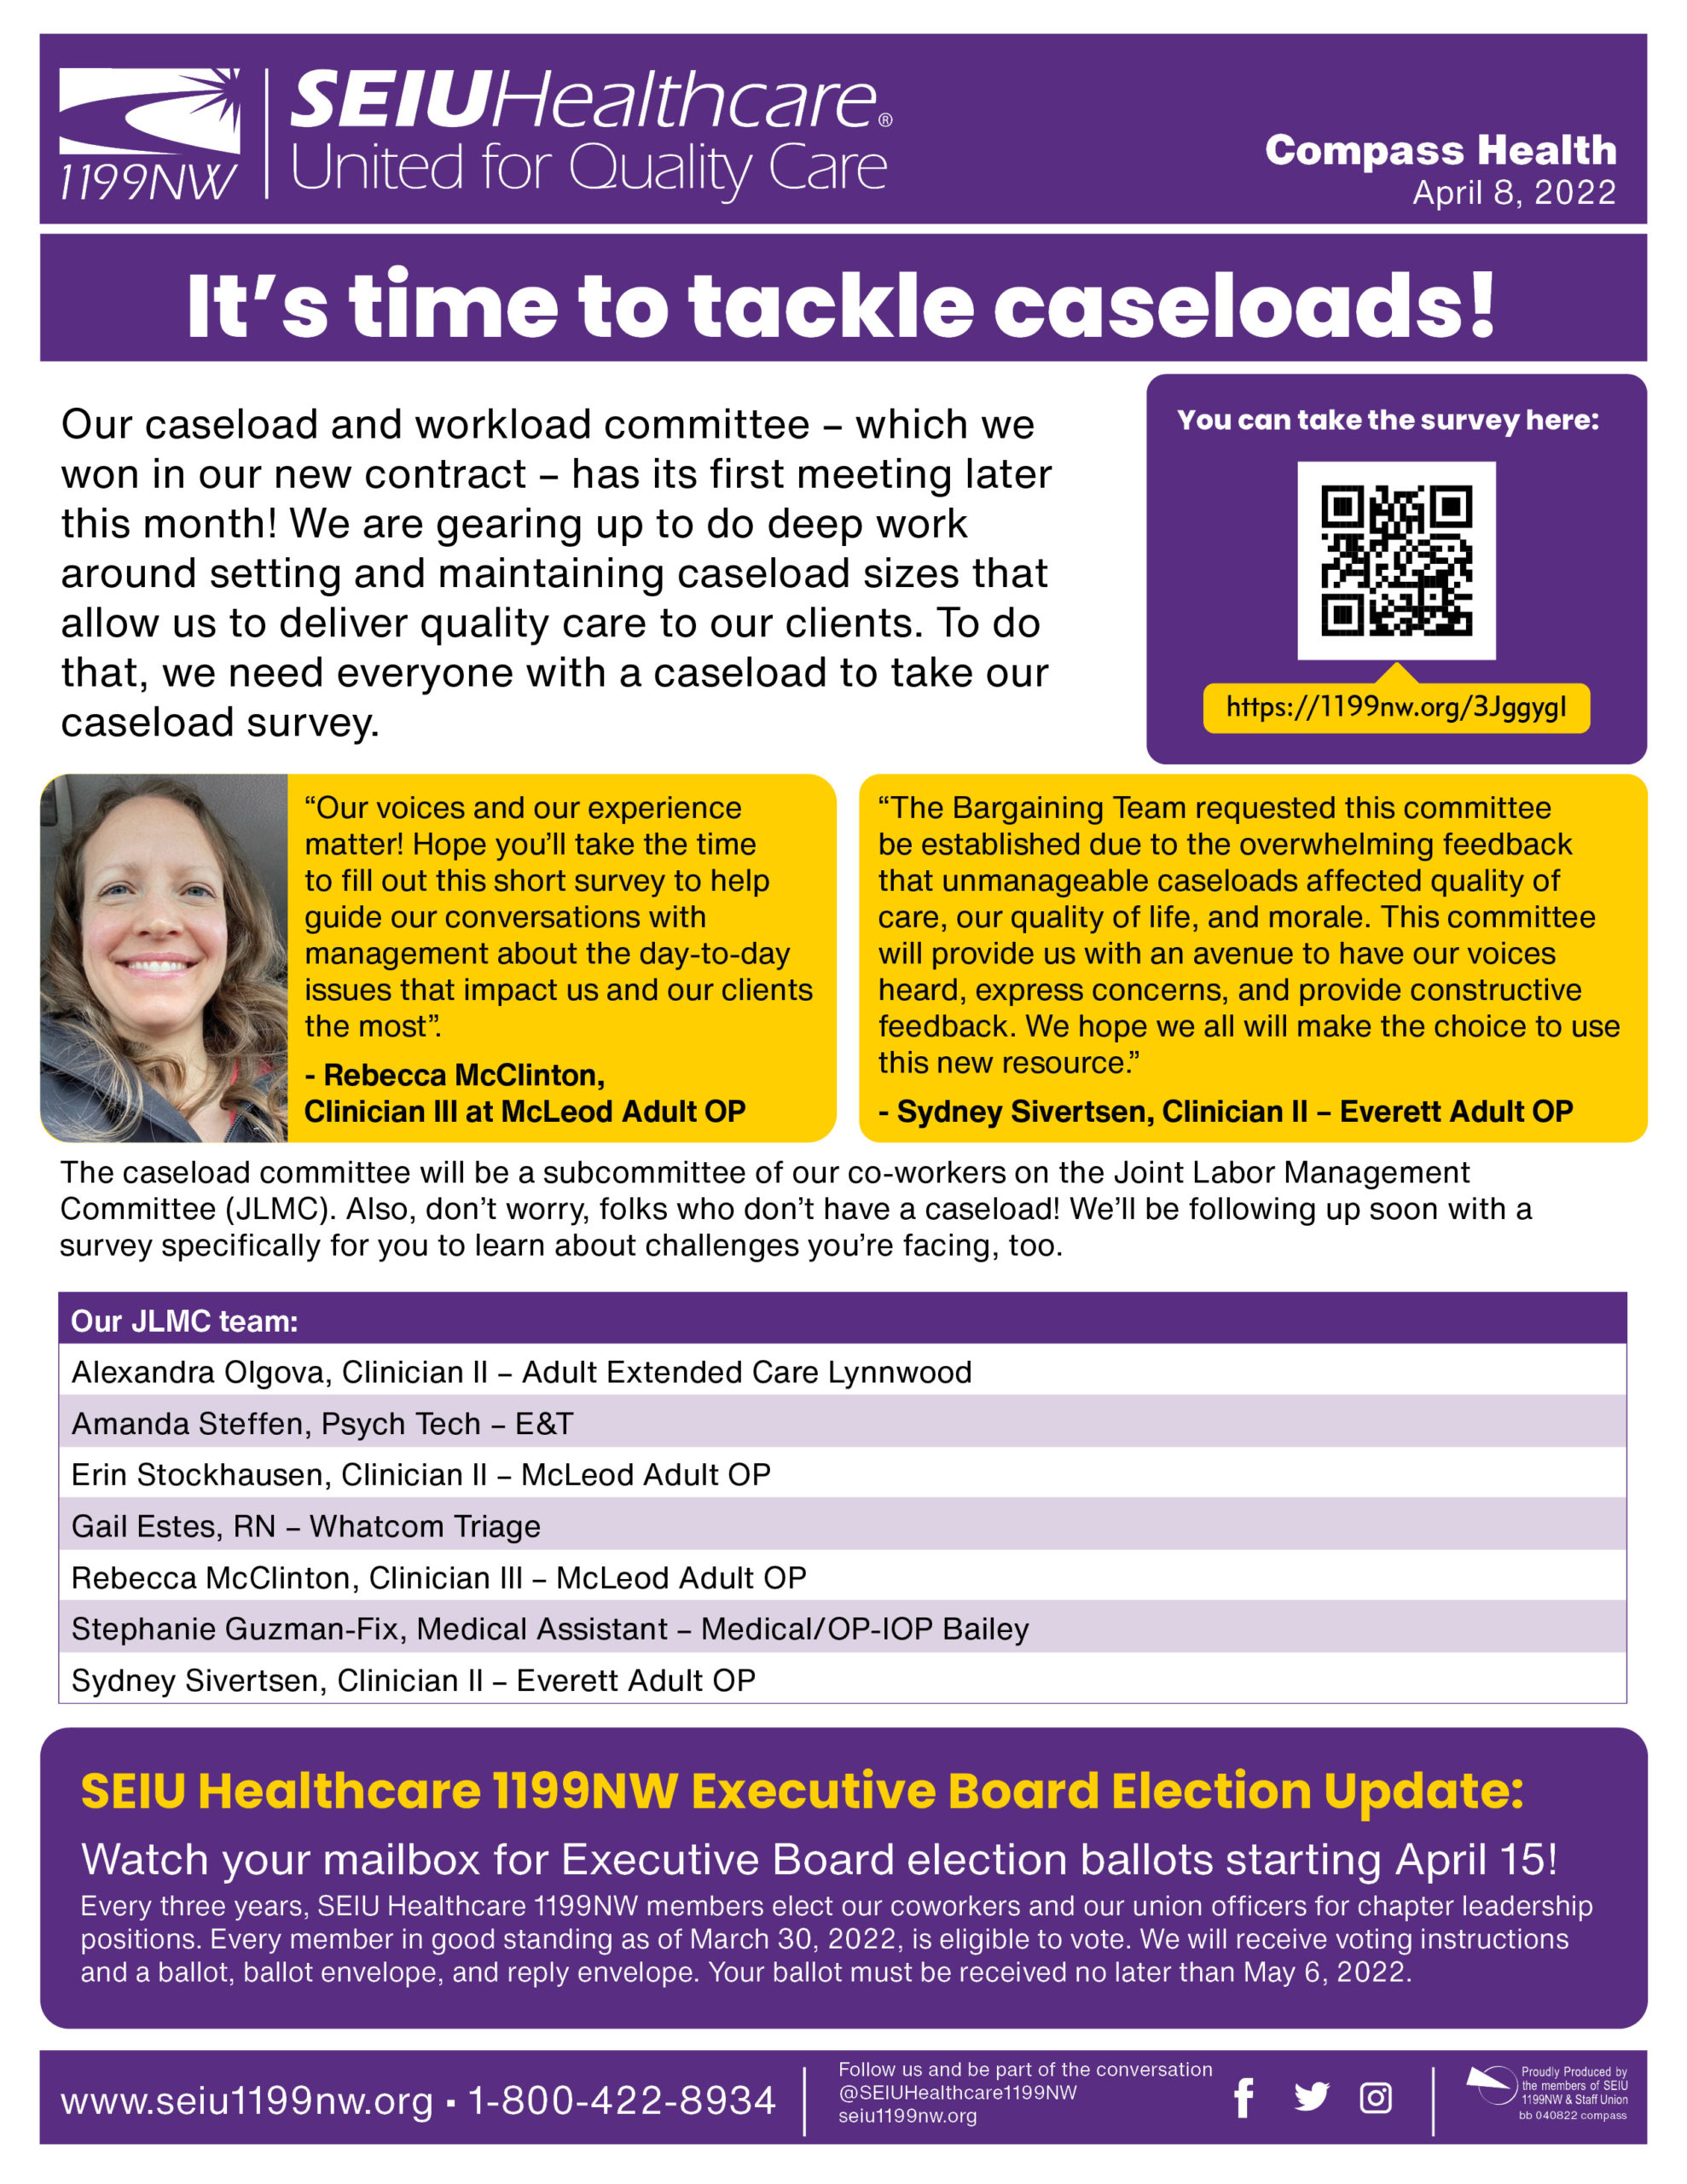 It’s time to tackle caseloads!